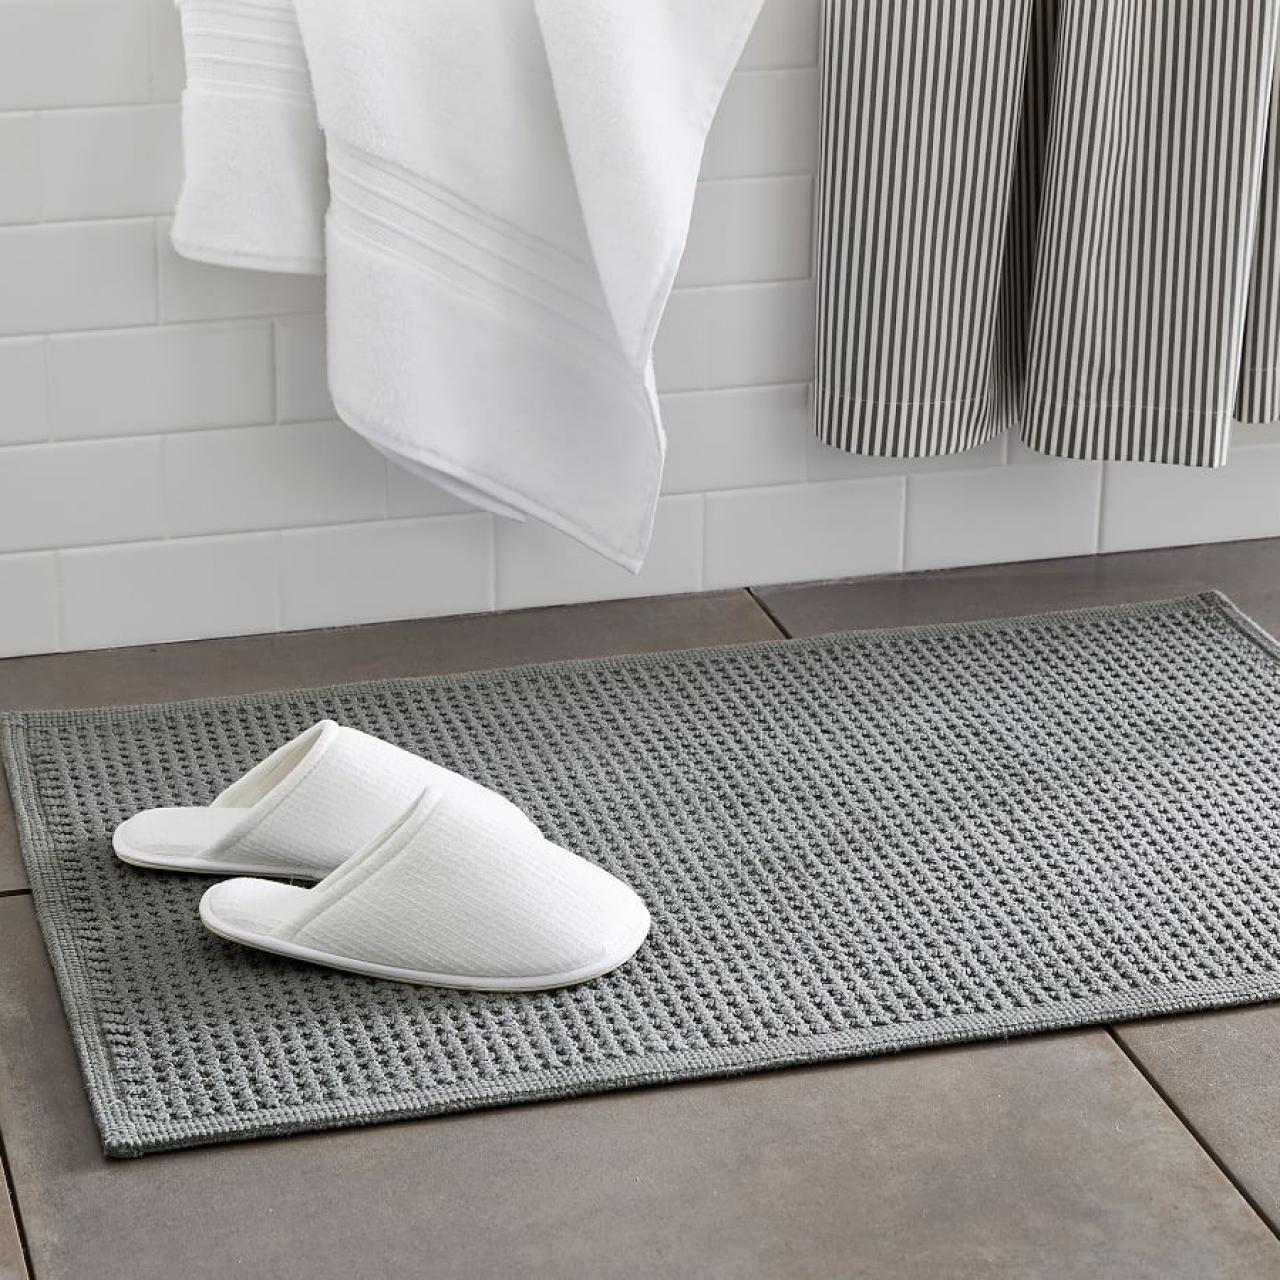 How Often Should You Replace Your Bath Mat